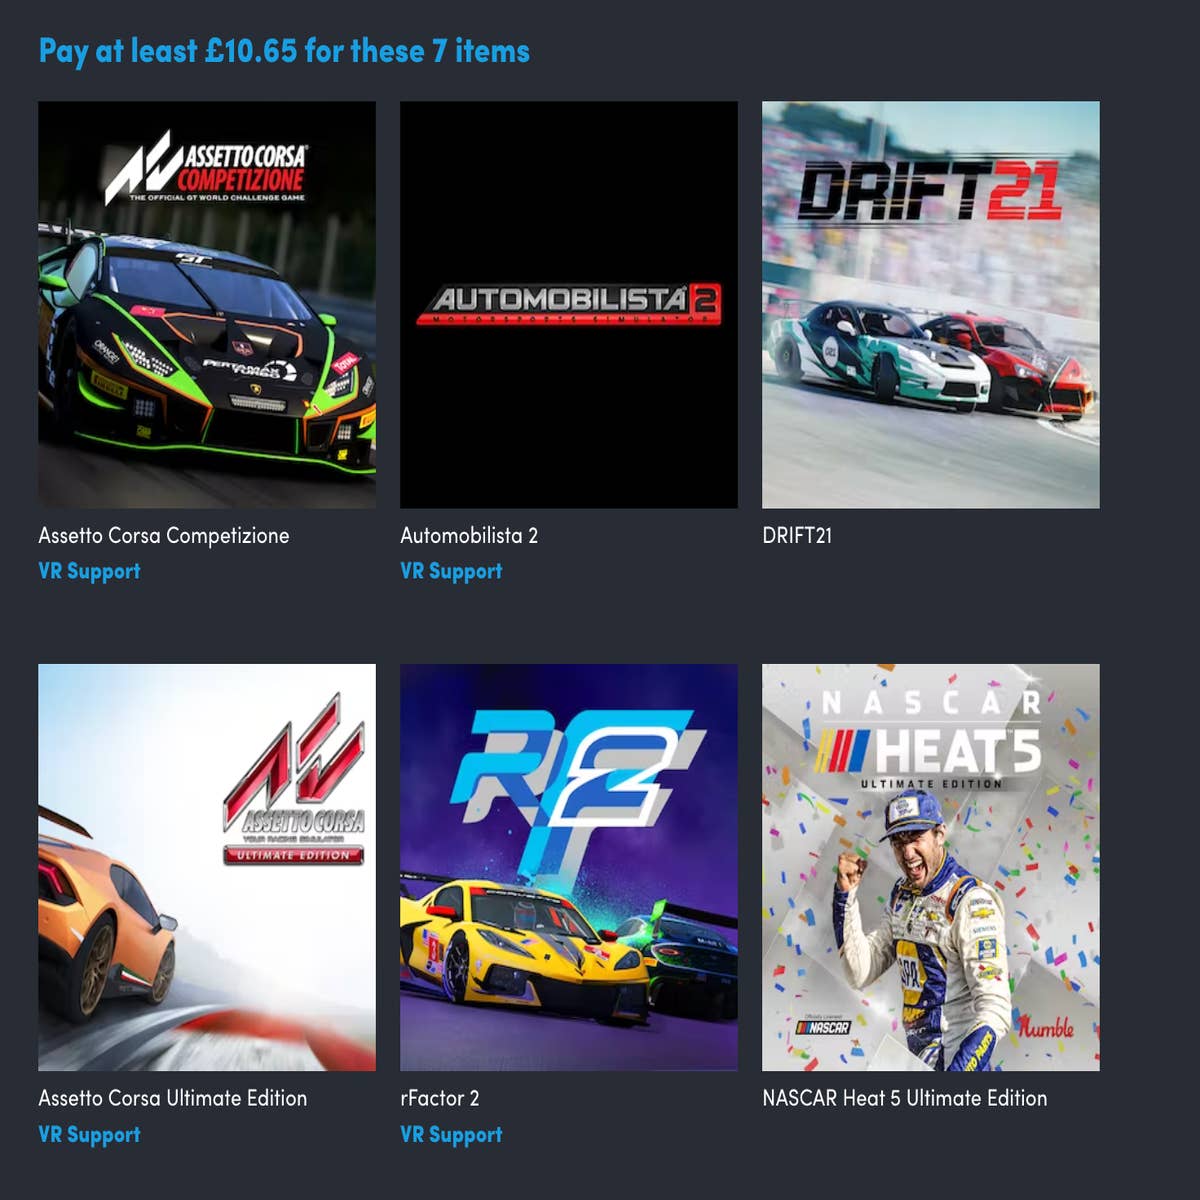 Buy Assetto Corsa from the Humble Store